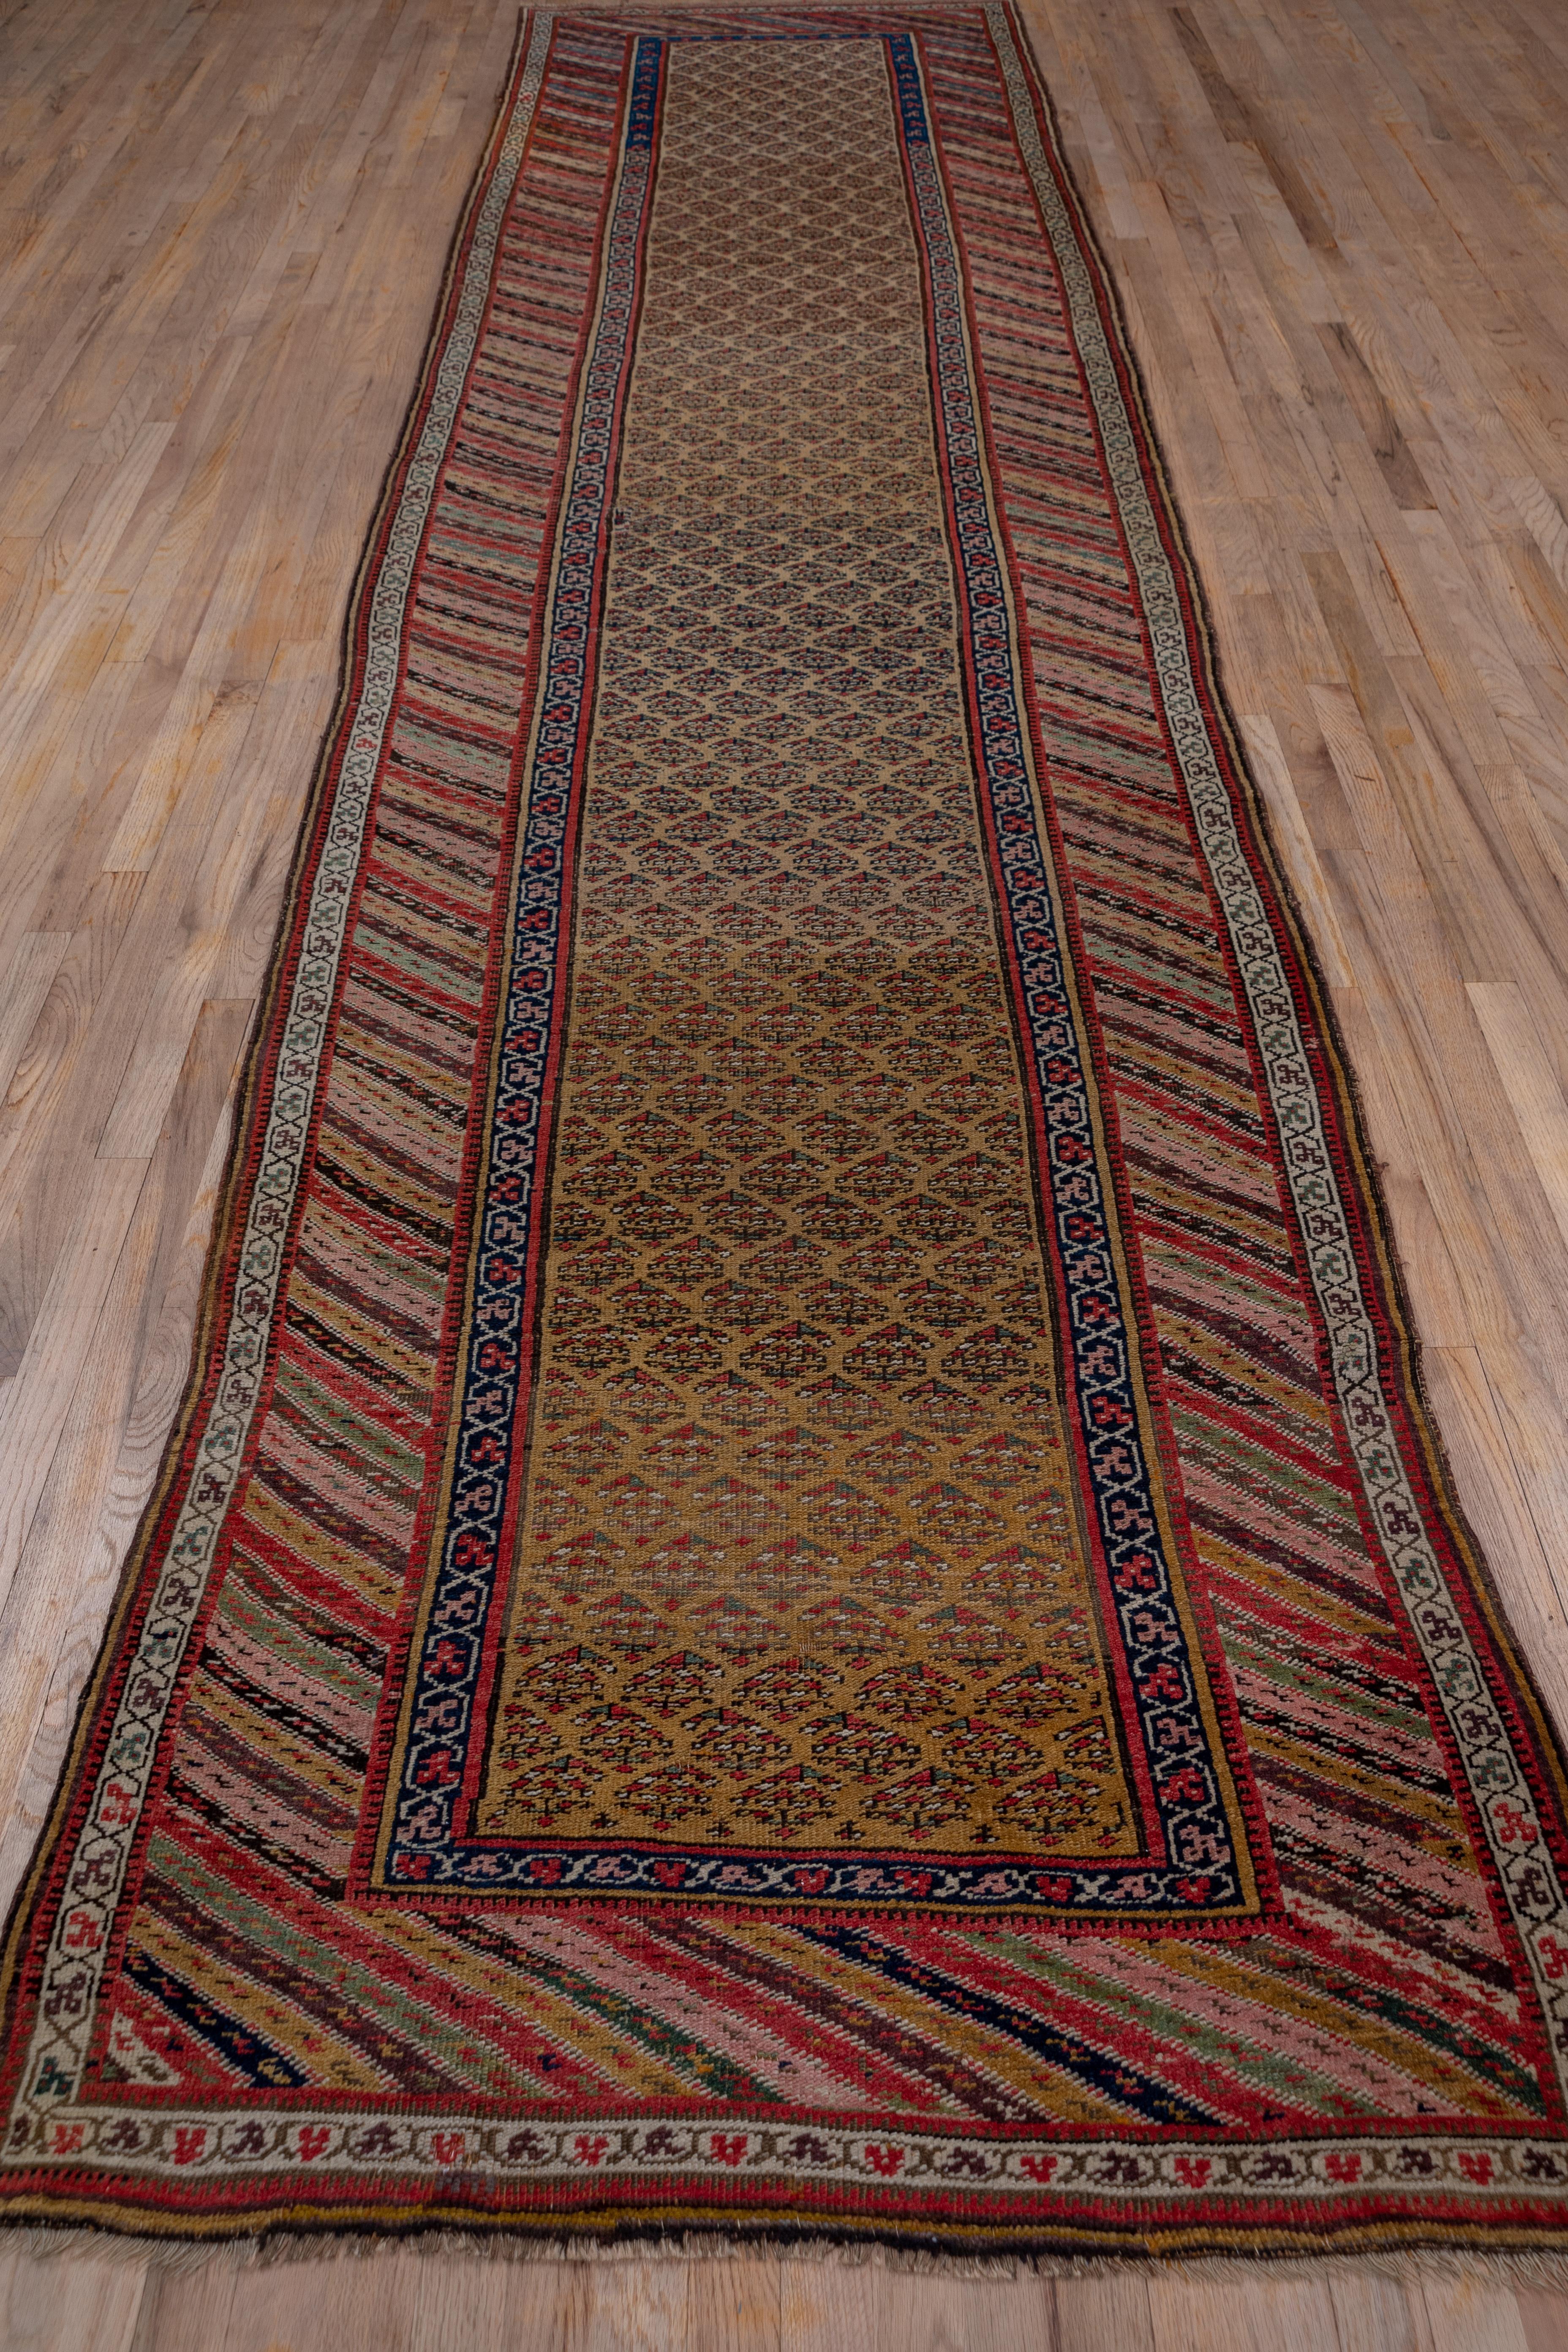 The golden honey field of this antique Kurdish village runner displays reversing, half drop rows of openwork bottehs and is set within a diagonally striped poly chrome main border and clover-pattern guards in ivory and black. The all natural dye